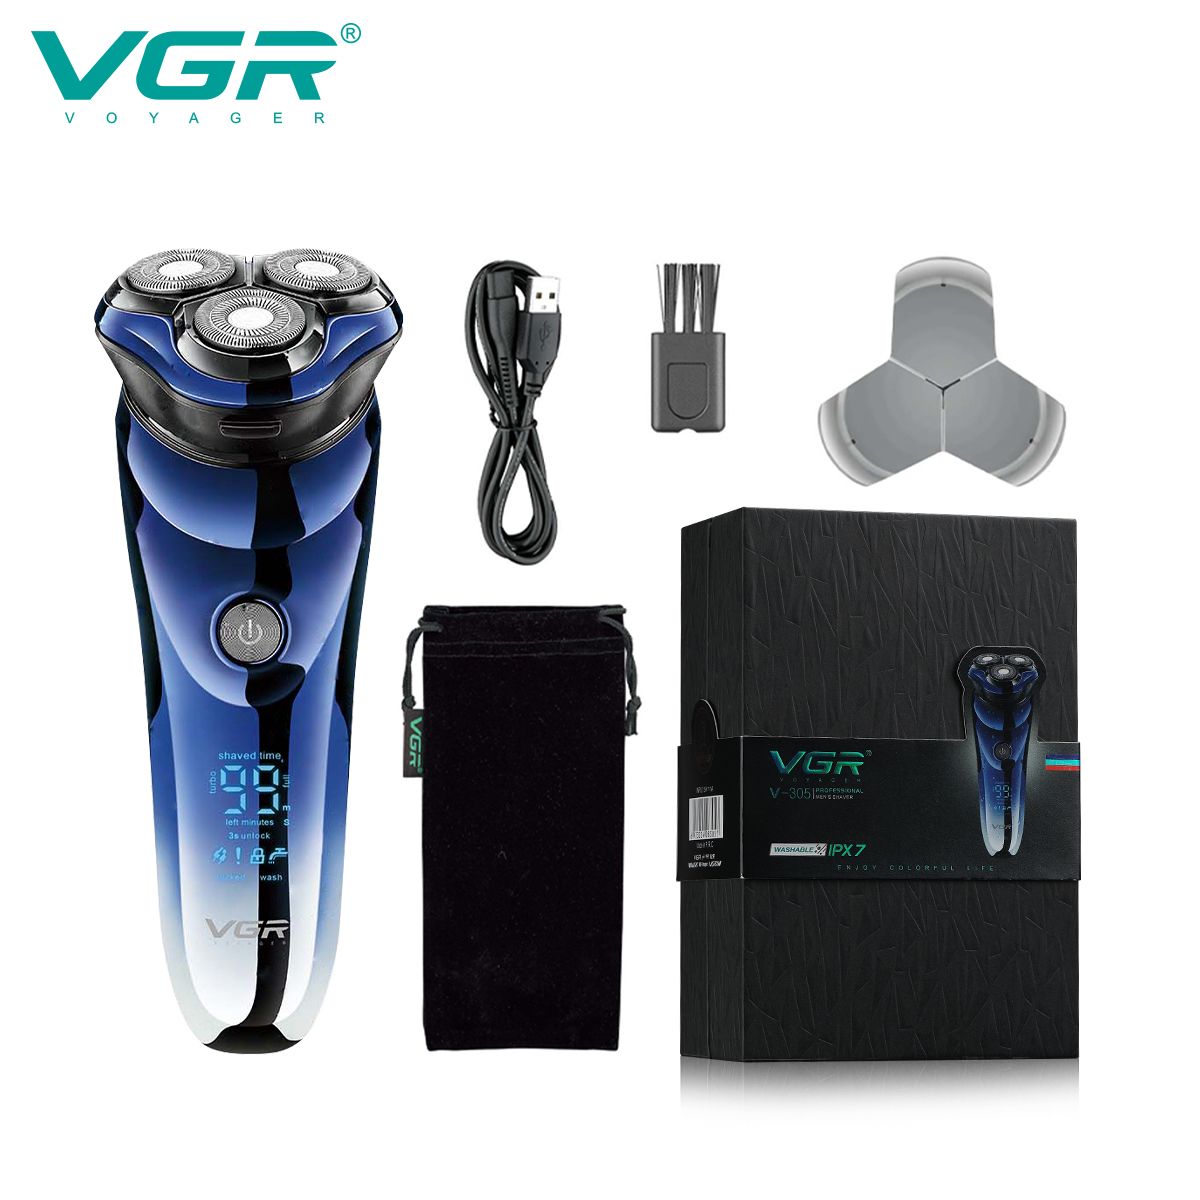 VGR V-305 washable shaver waterproof IPX7 for men electric shaver for men razor with LED display travel Specification drawing